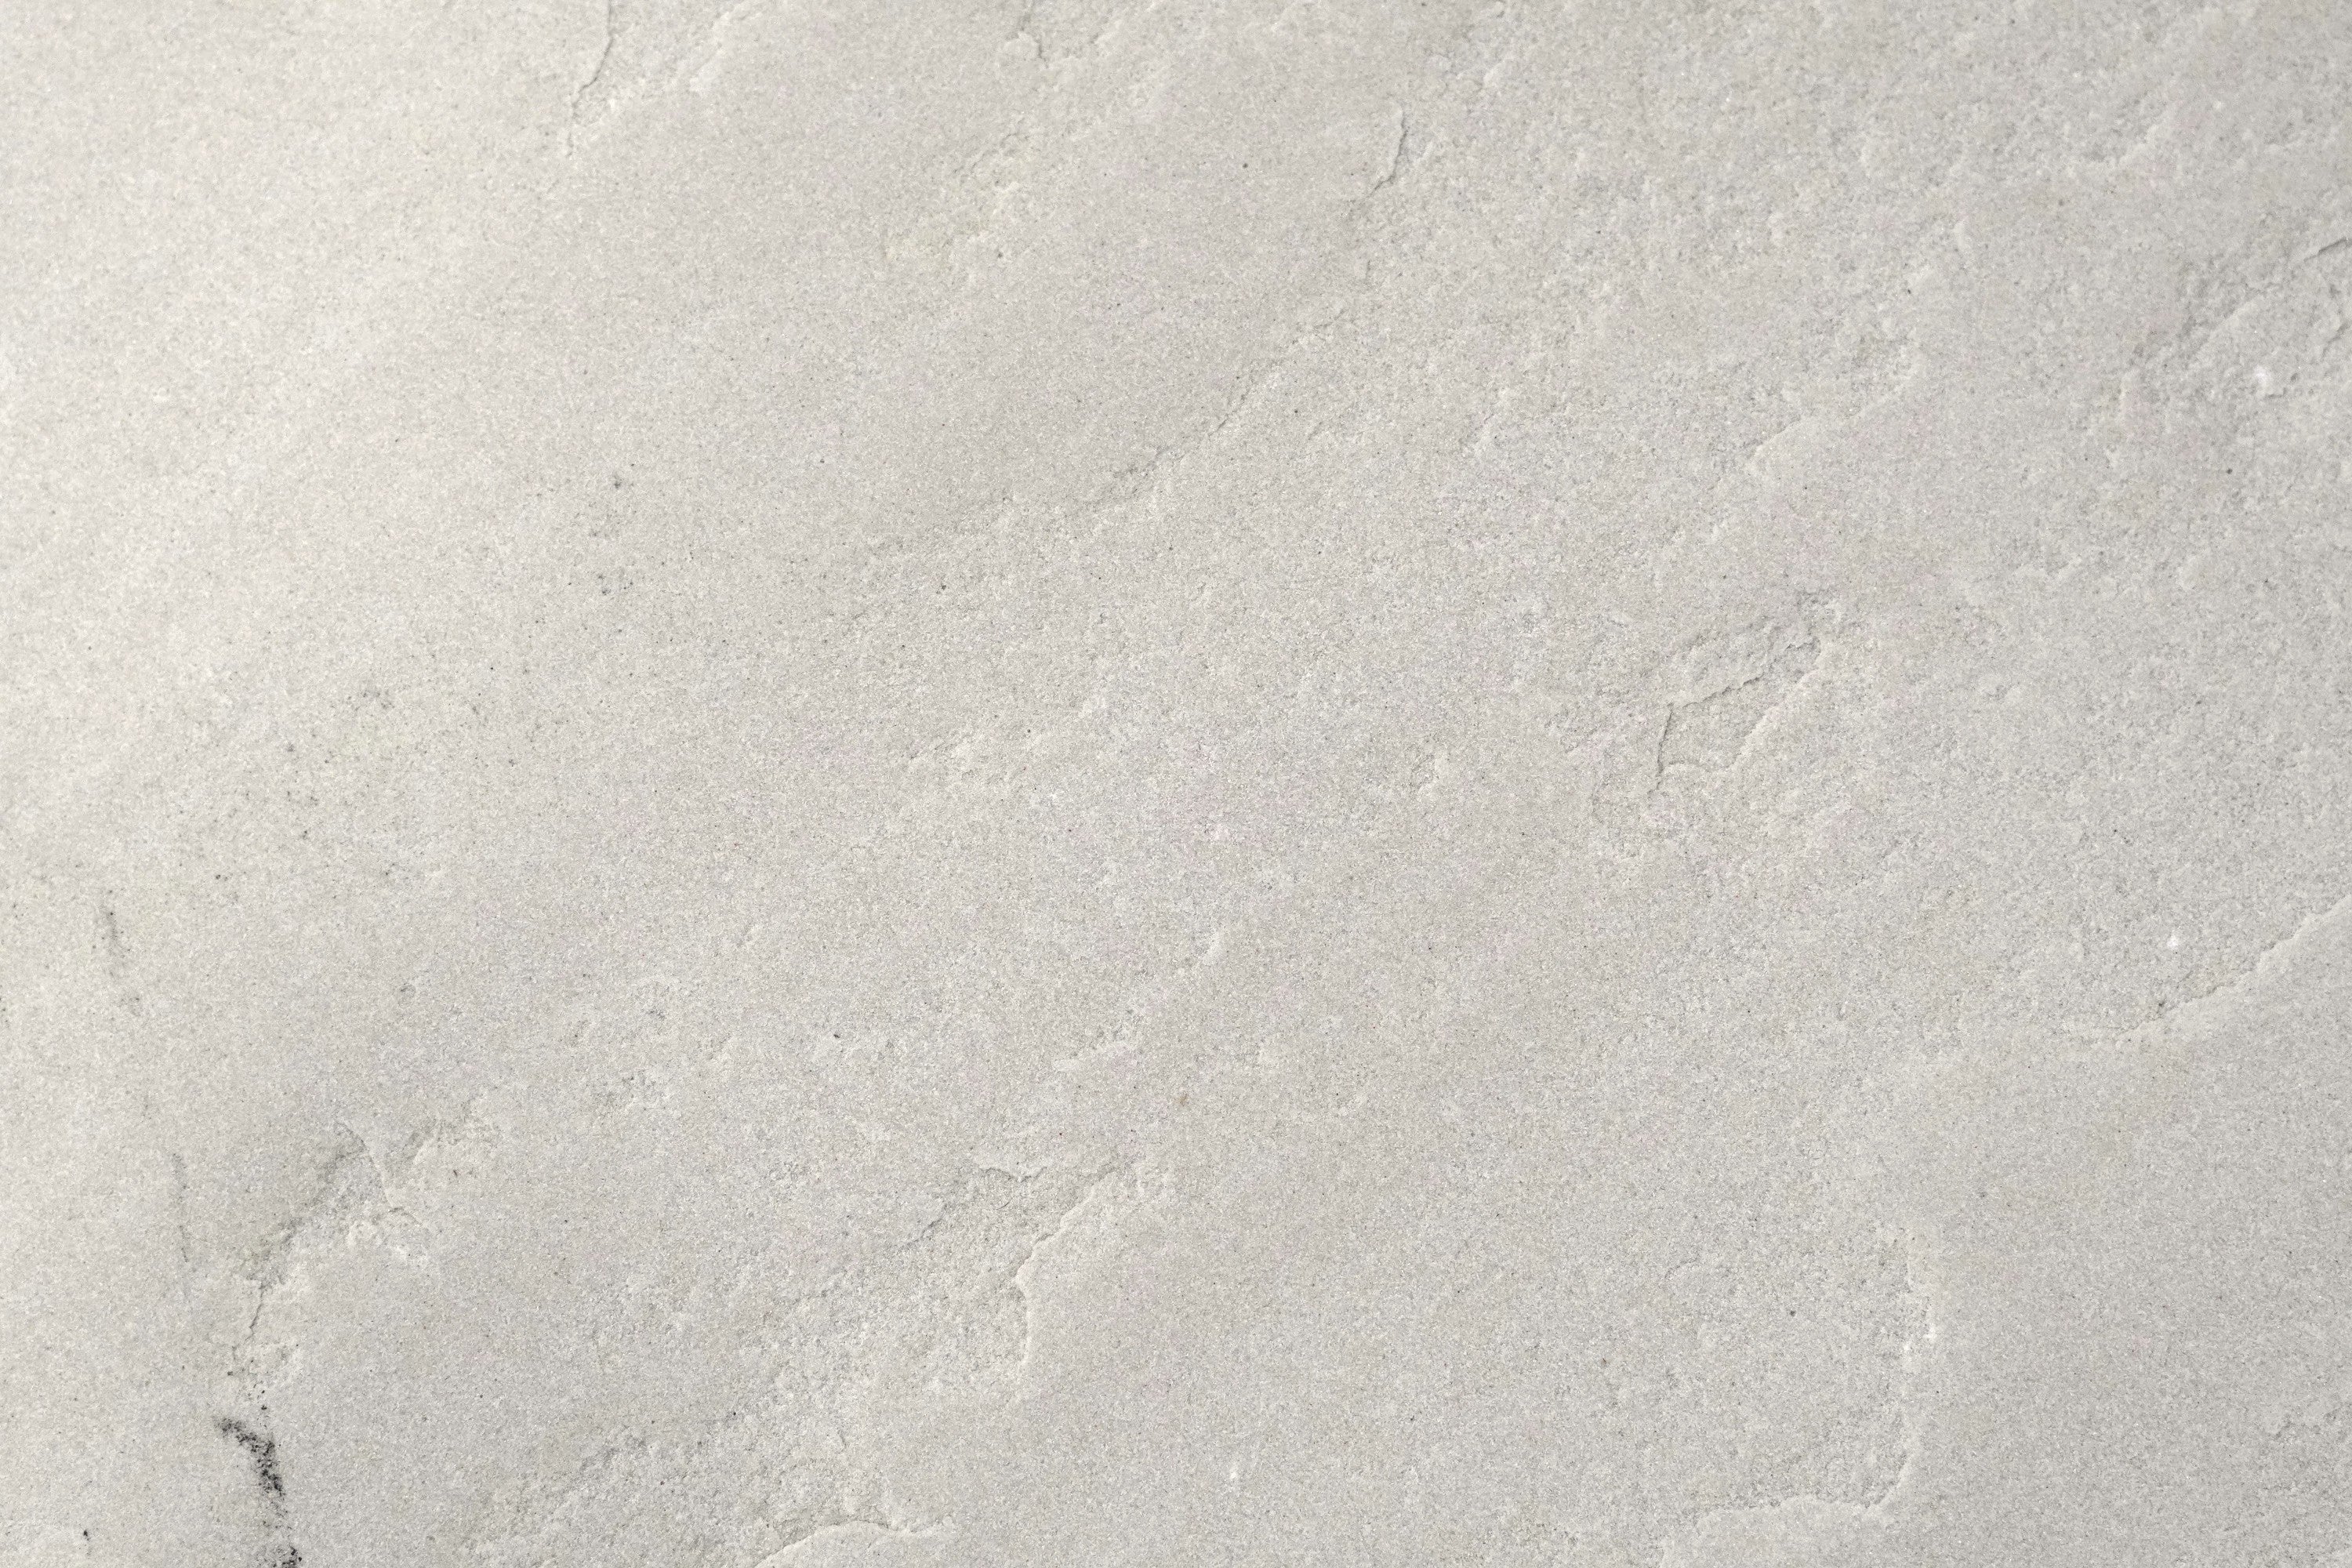 beige antiqued natural limestone field tile biarritz beige width of 16 length of 24 and thickness of 0.75 sold to you by surface group international